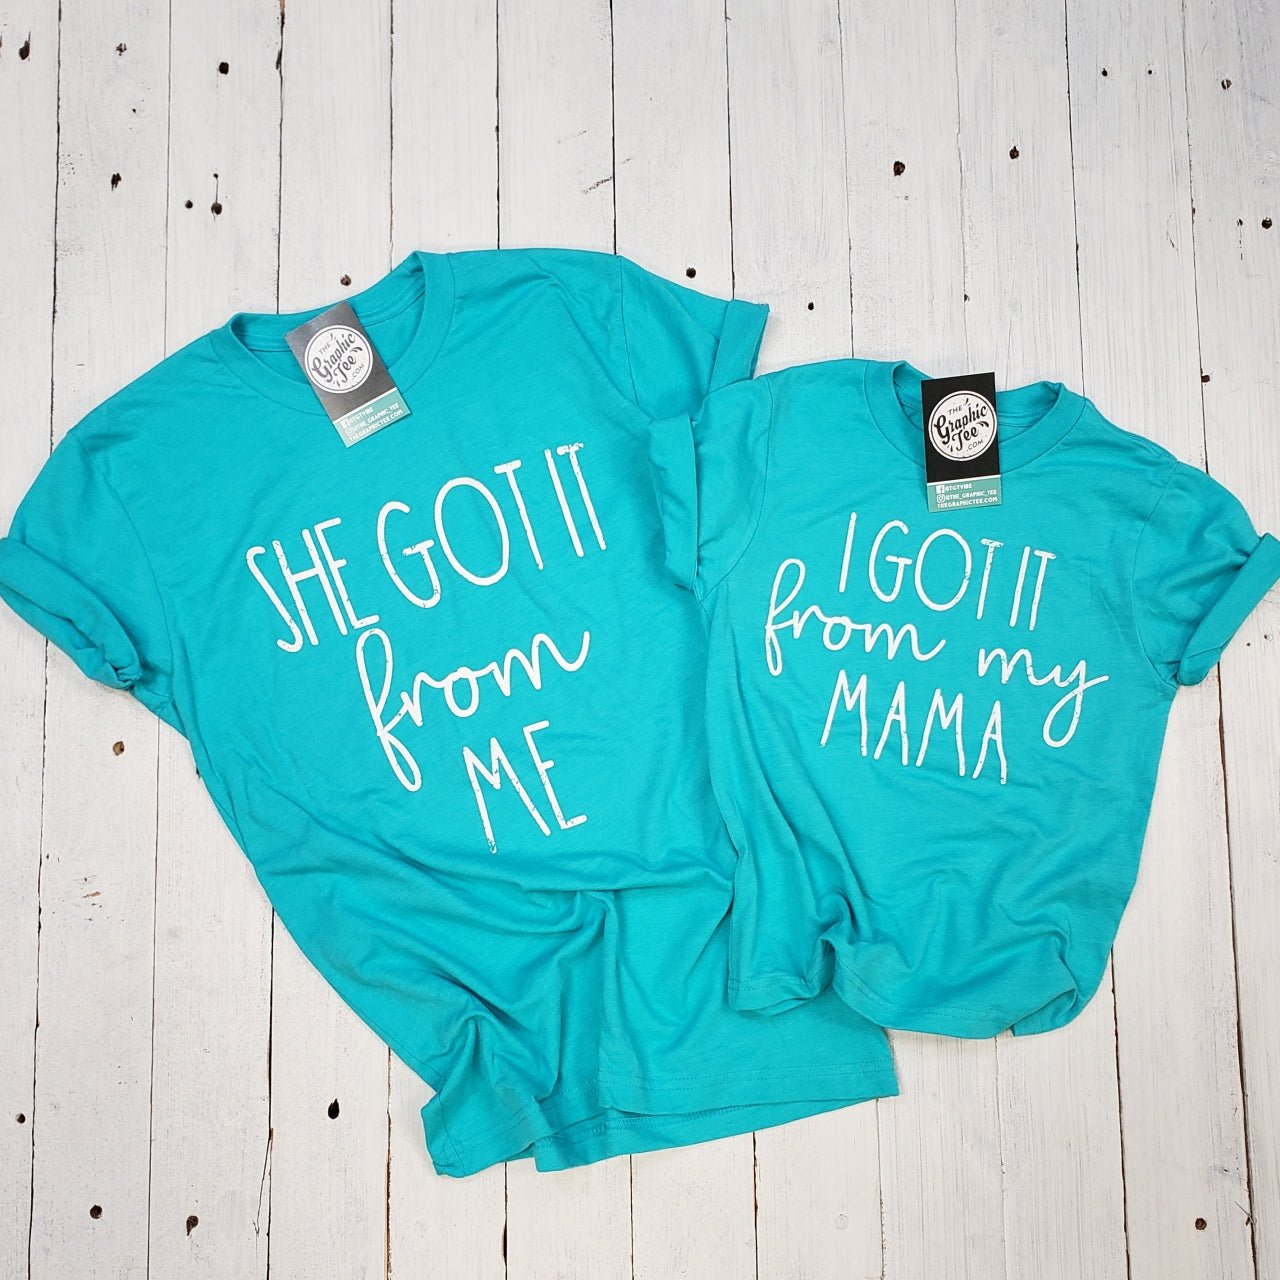 She Got It From Me ADULT Unisex Tees - The Graphic Tee